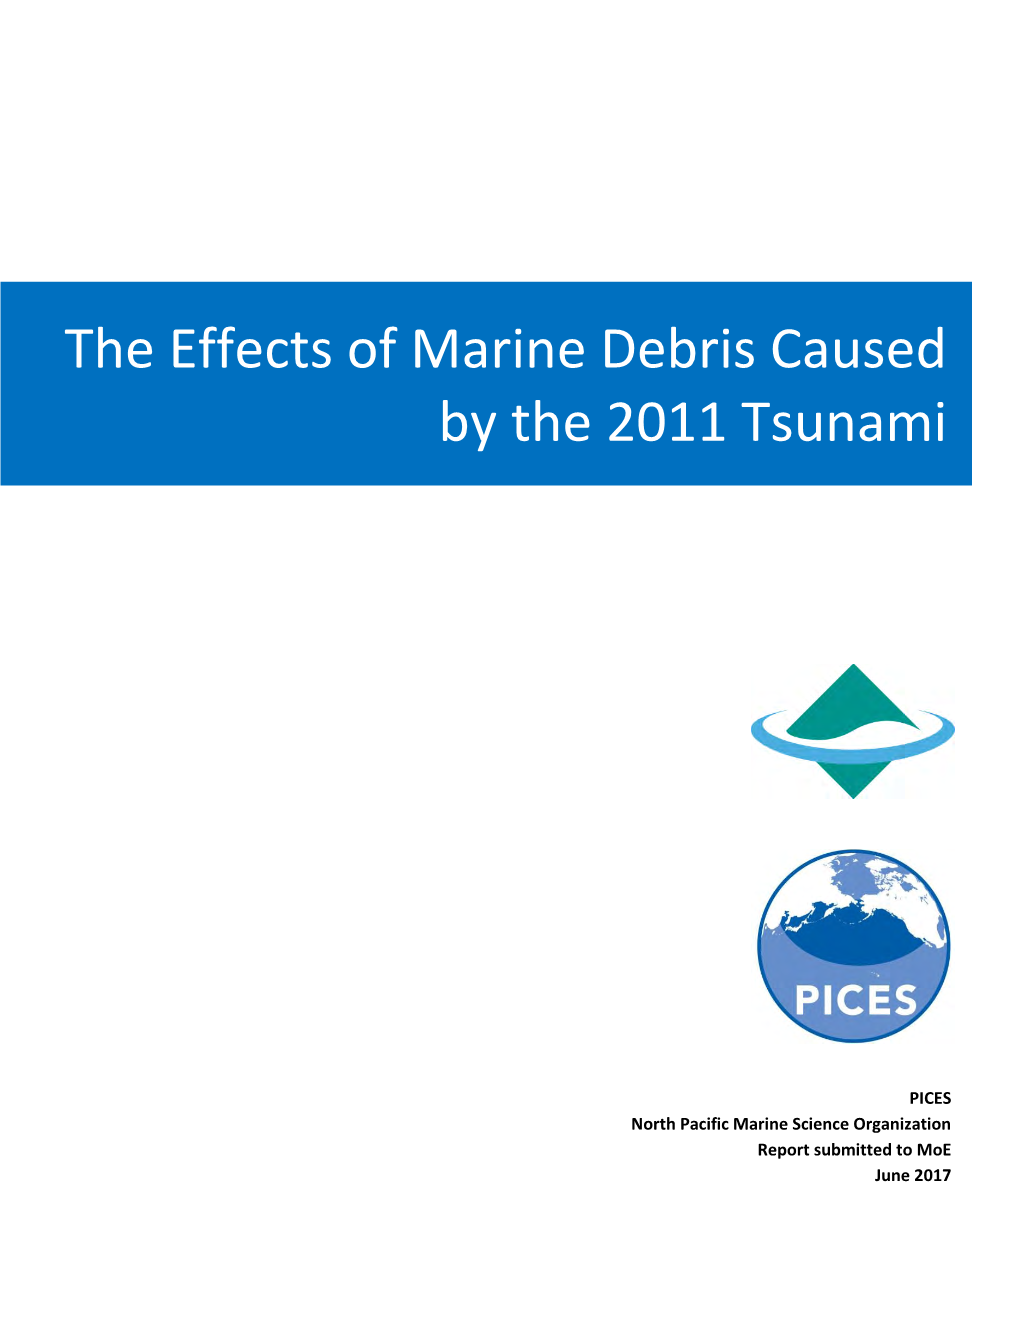 The Effects of Marine Debris Caused by the 2011 Tsunami